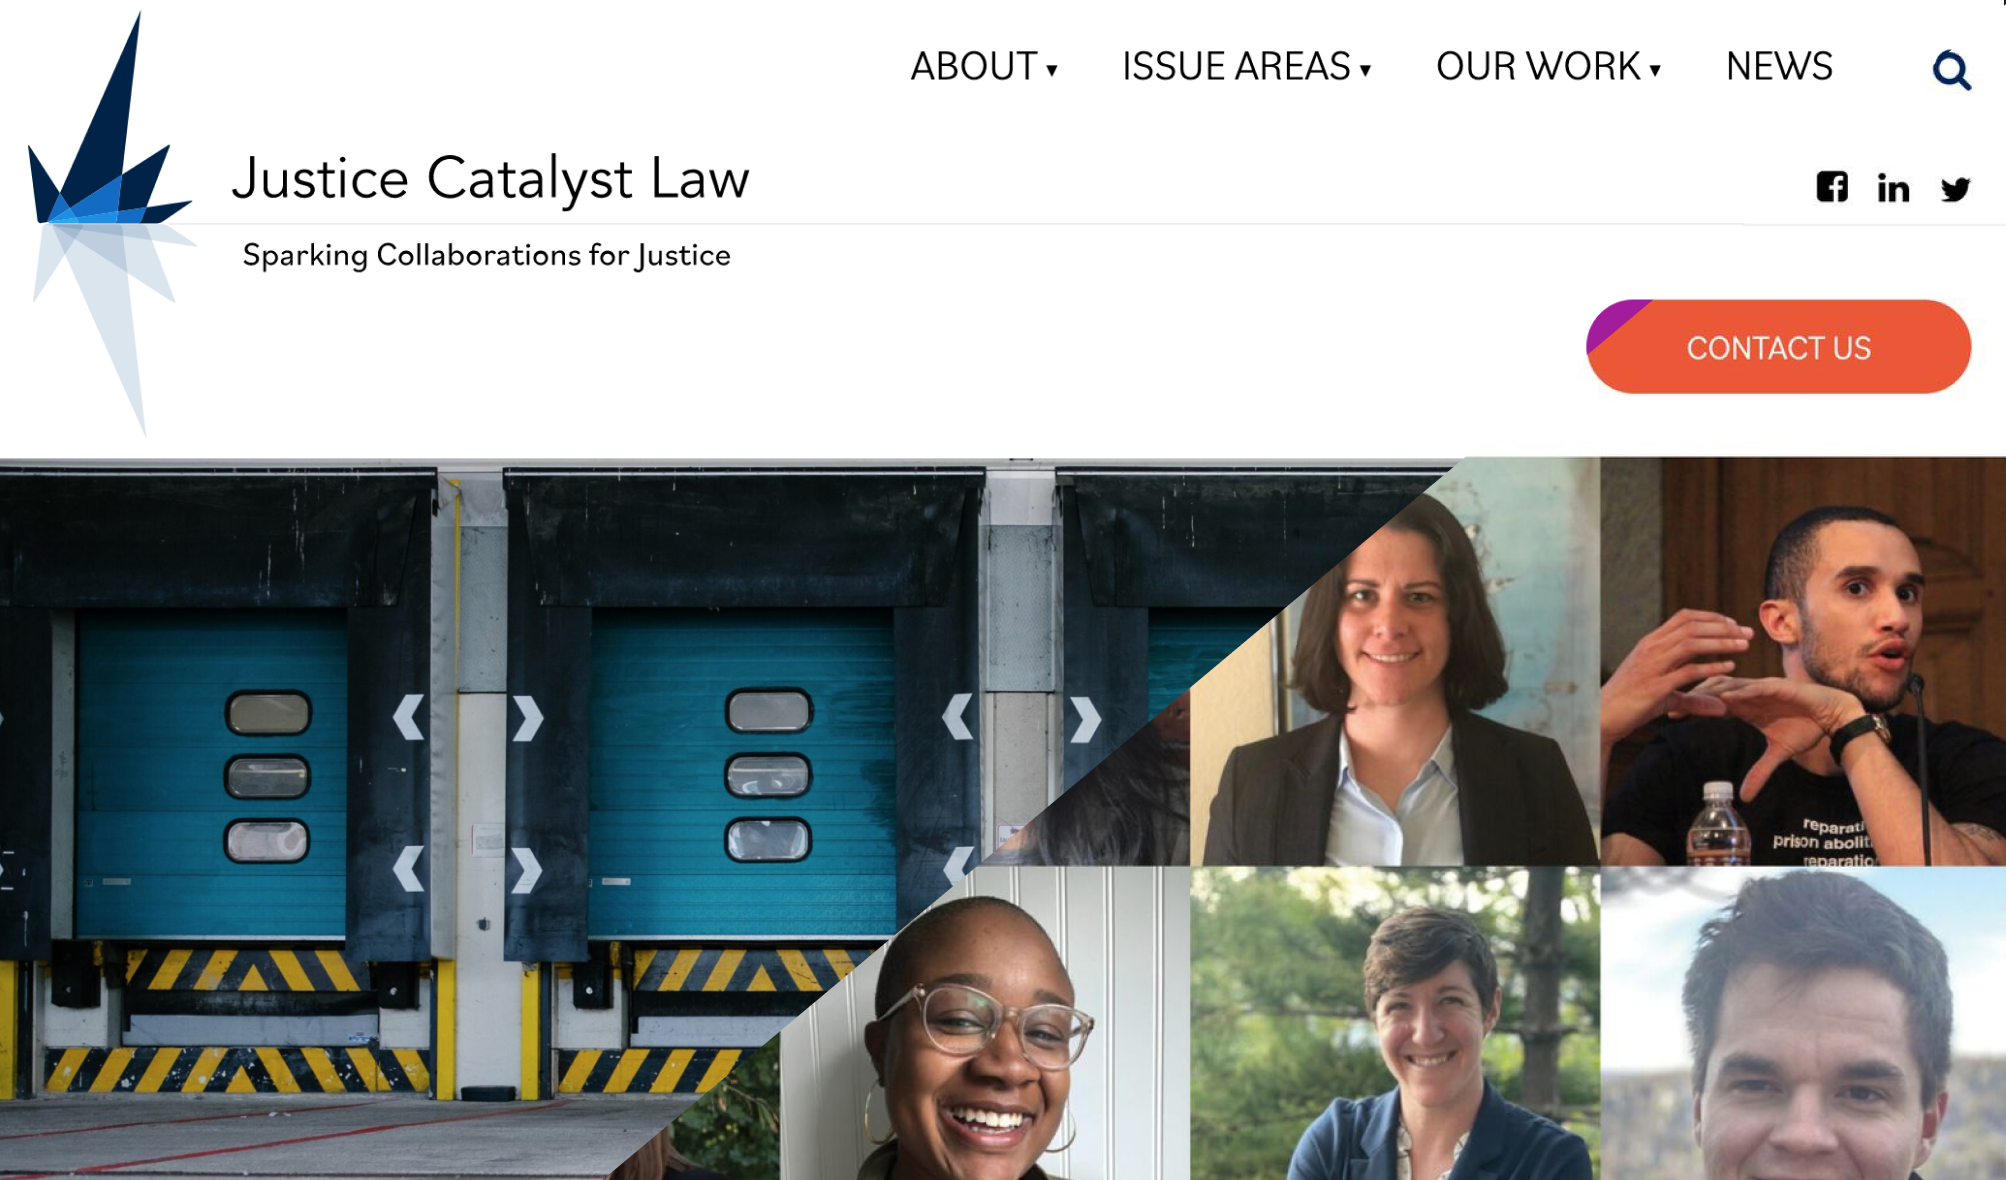 Twin sites for Justice Catalyst and Justice Catalyst Law